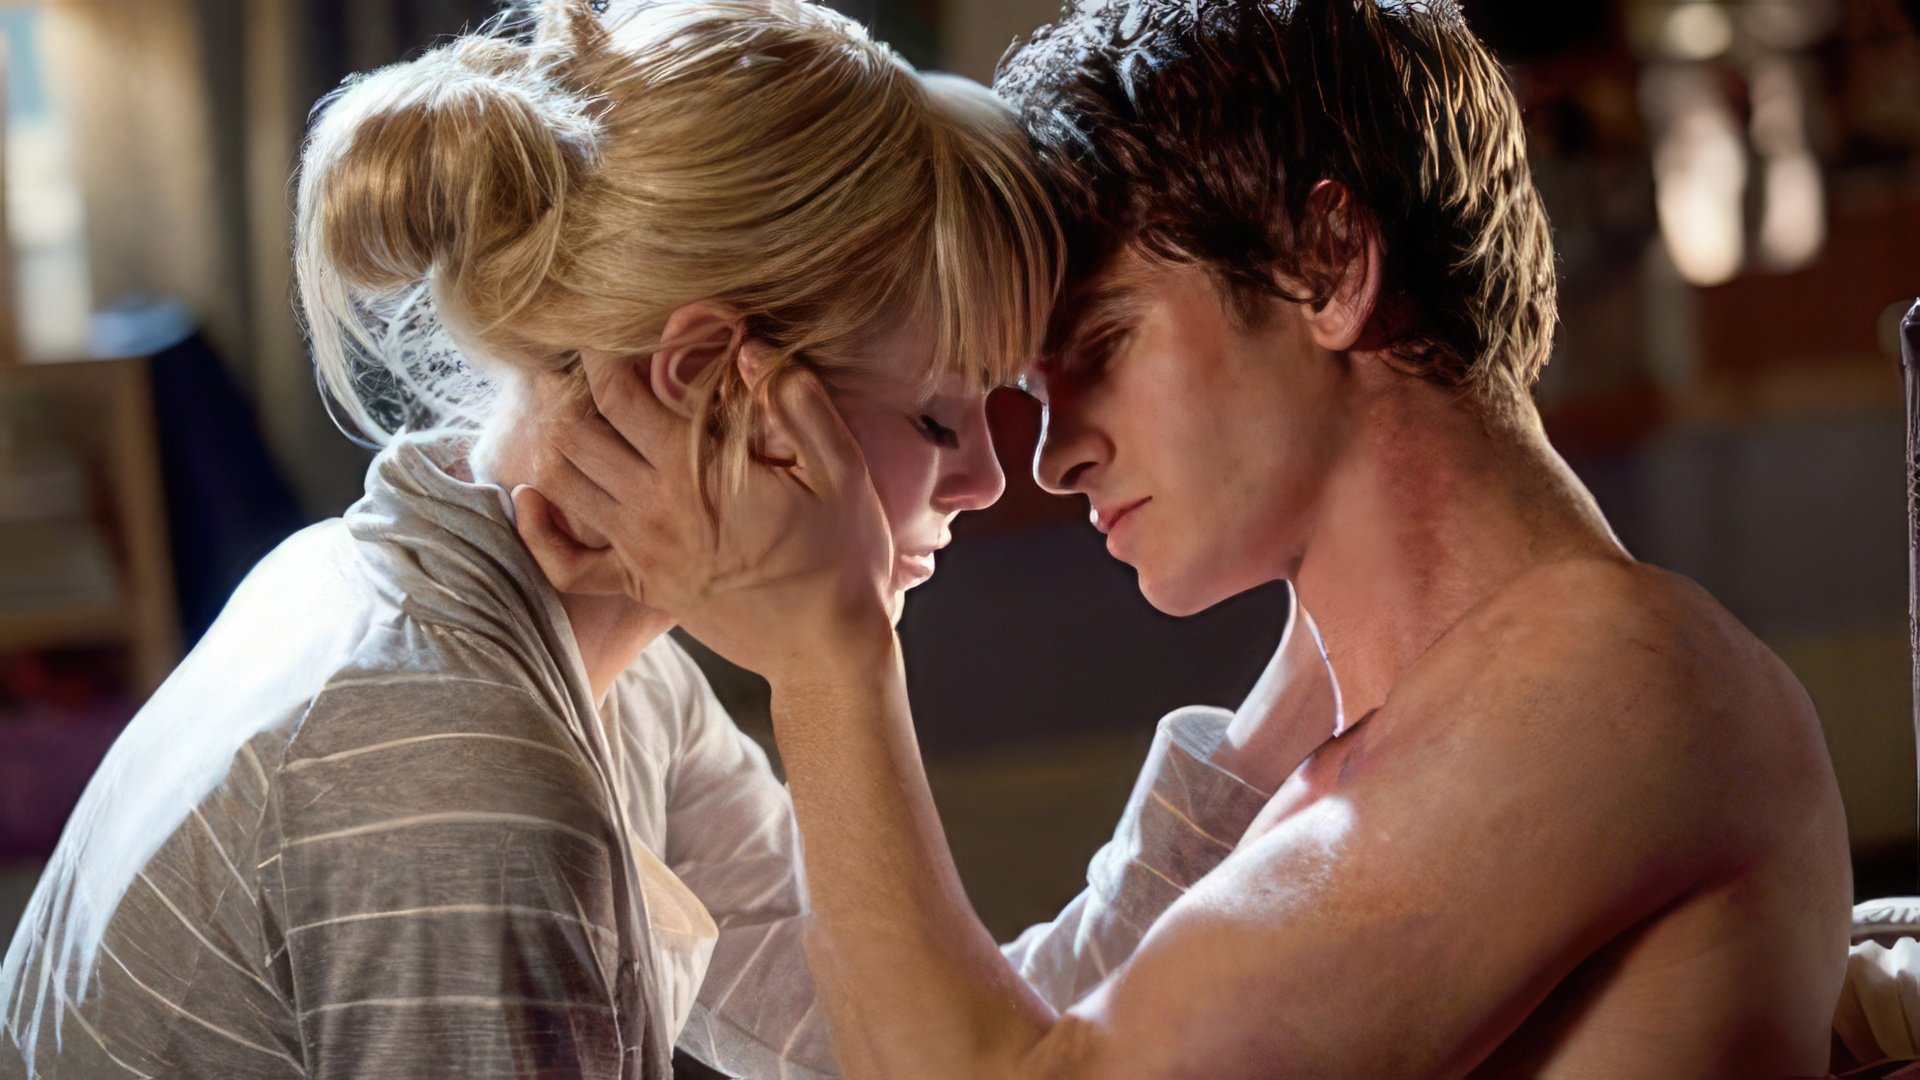 Andrew Garfield’s and Emma Stone’s relationship began on set